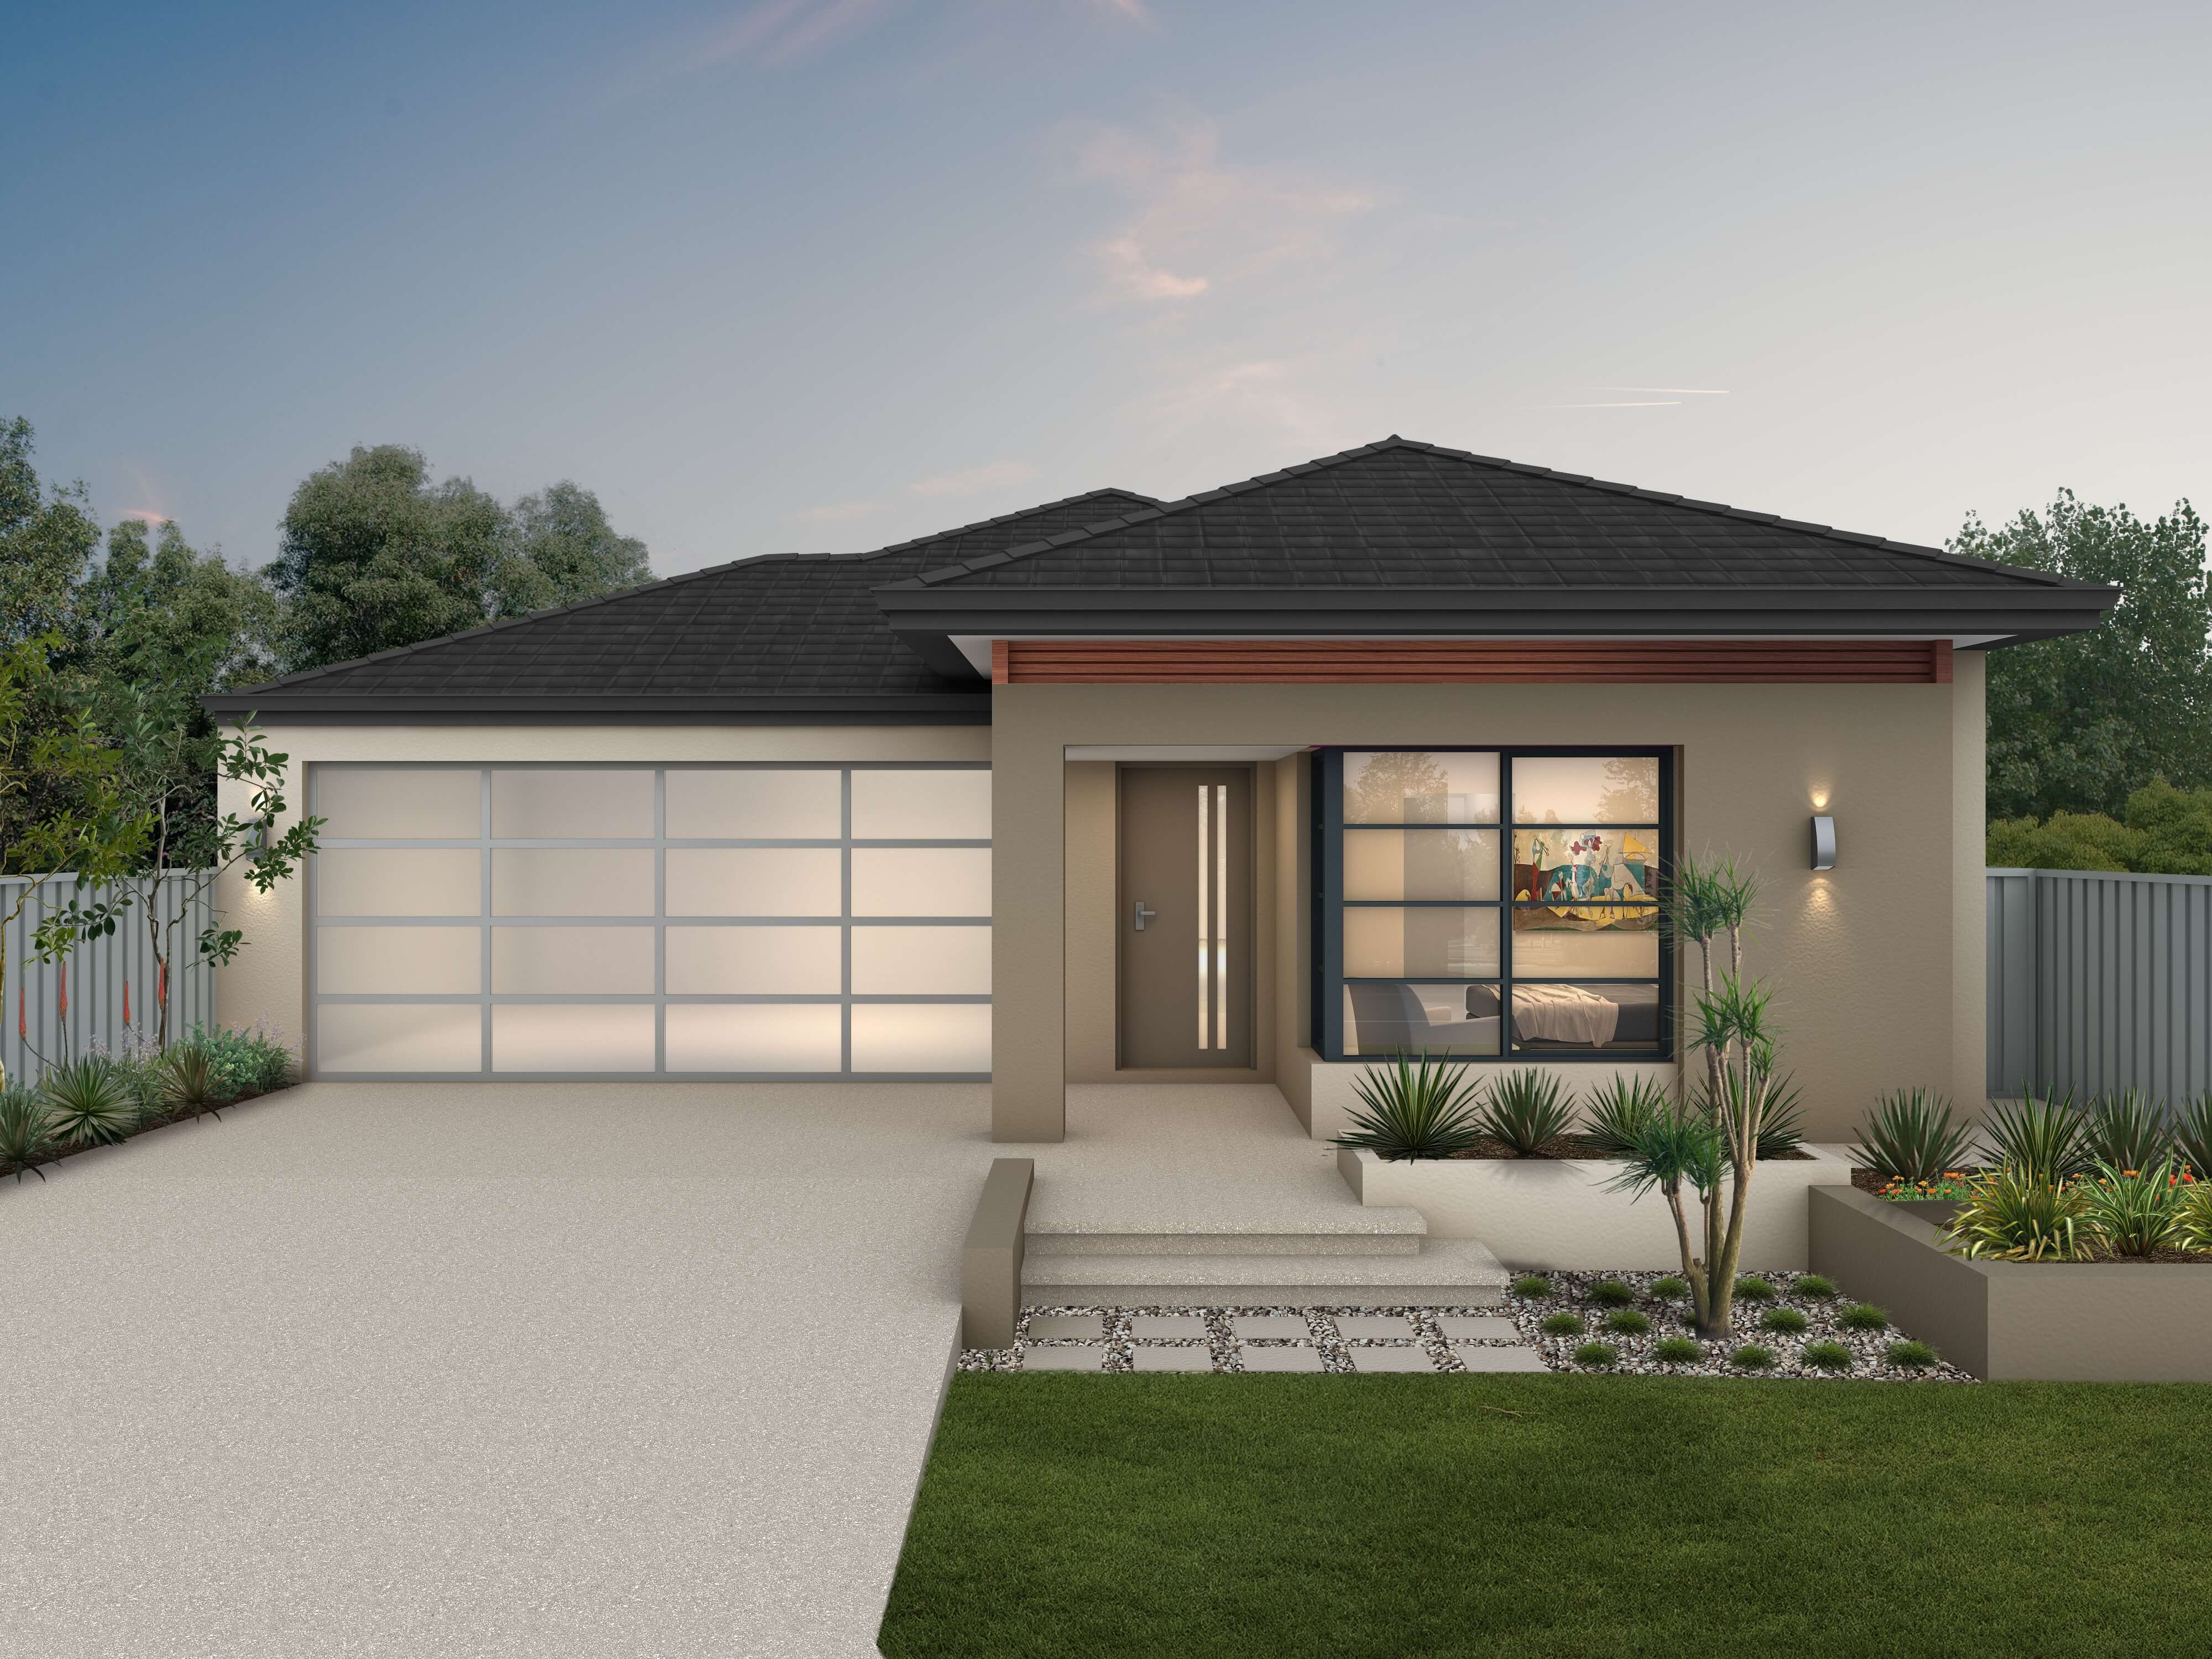 The Helena, a new home design by Move Homes for Perth families and first time home buyers